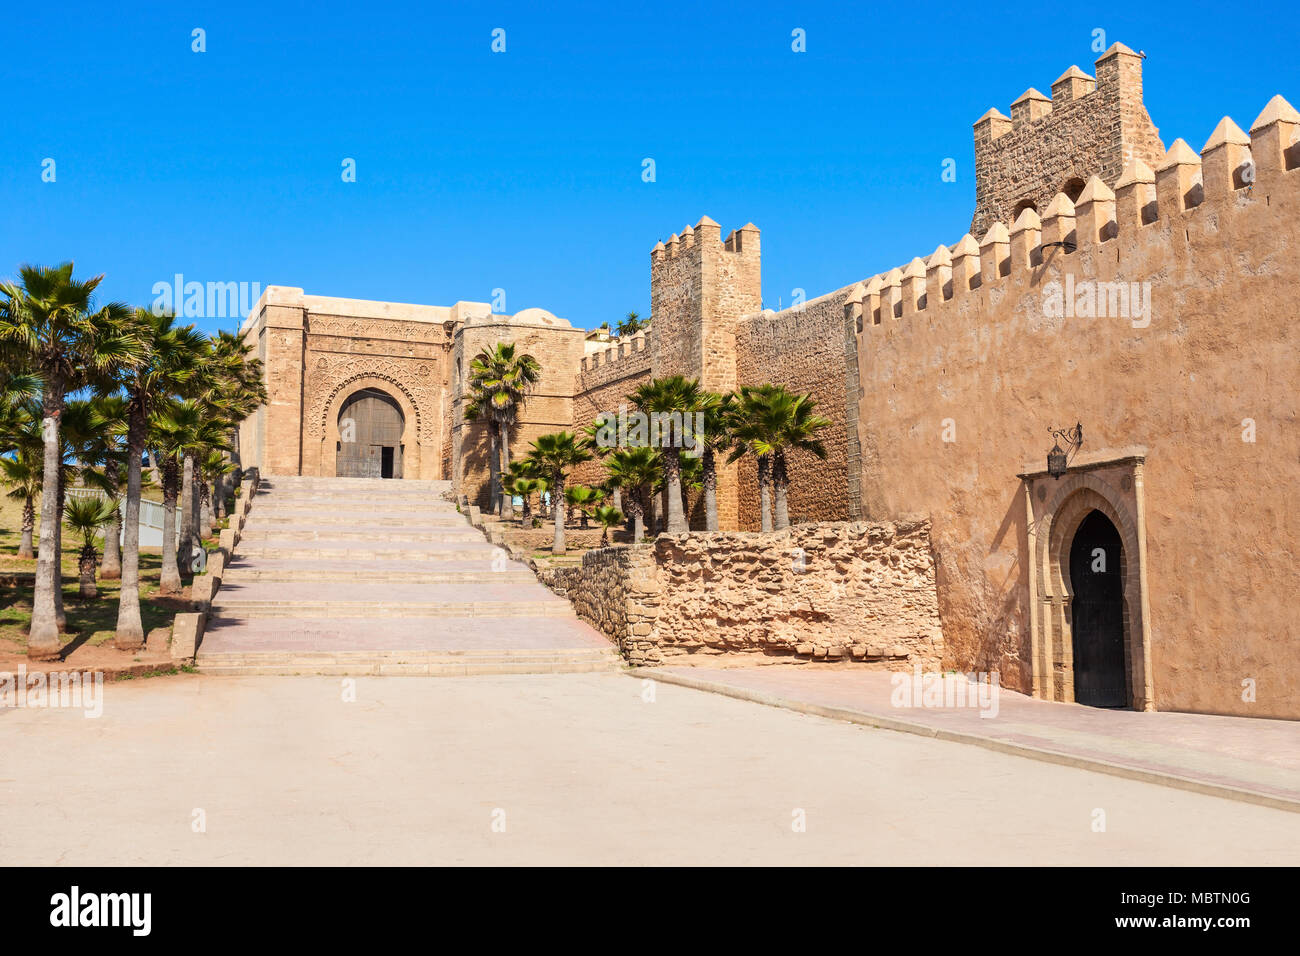 The Kasbah of the Udayas fortress in in Morocco. Kasbah of the Udayas is located at mouth the Bou Regreg river in Rabat, Morocco. Rab Stock Photo -